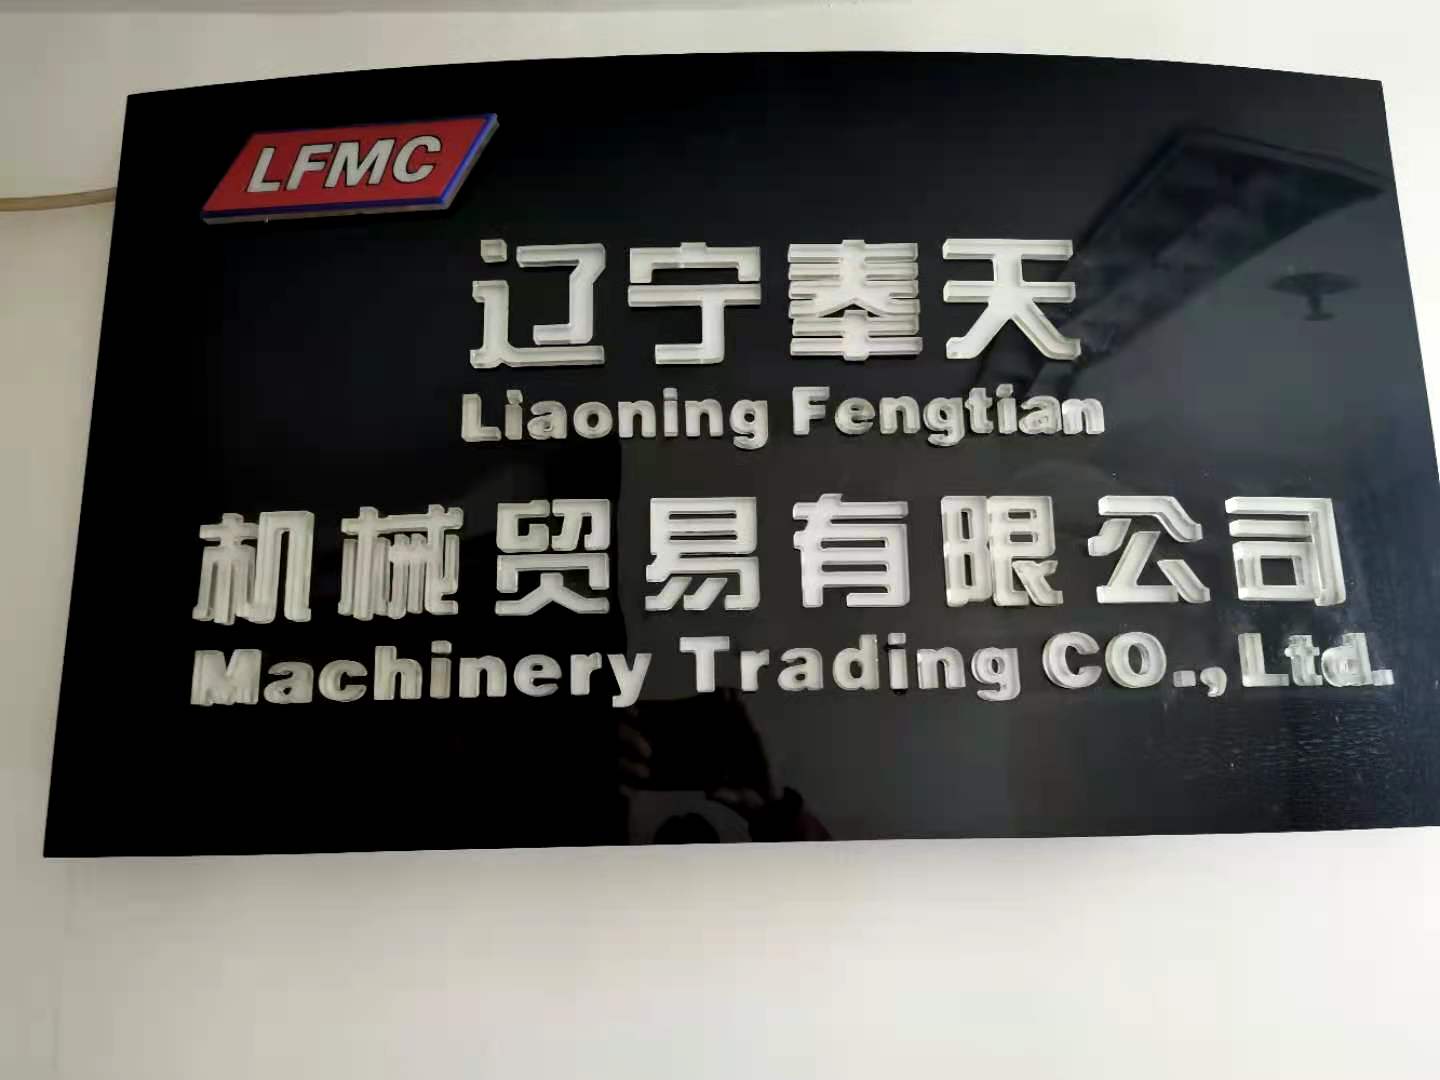 LIAONING FENGTIAN MACHINERY TRADING CO., LTD.